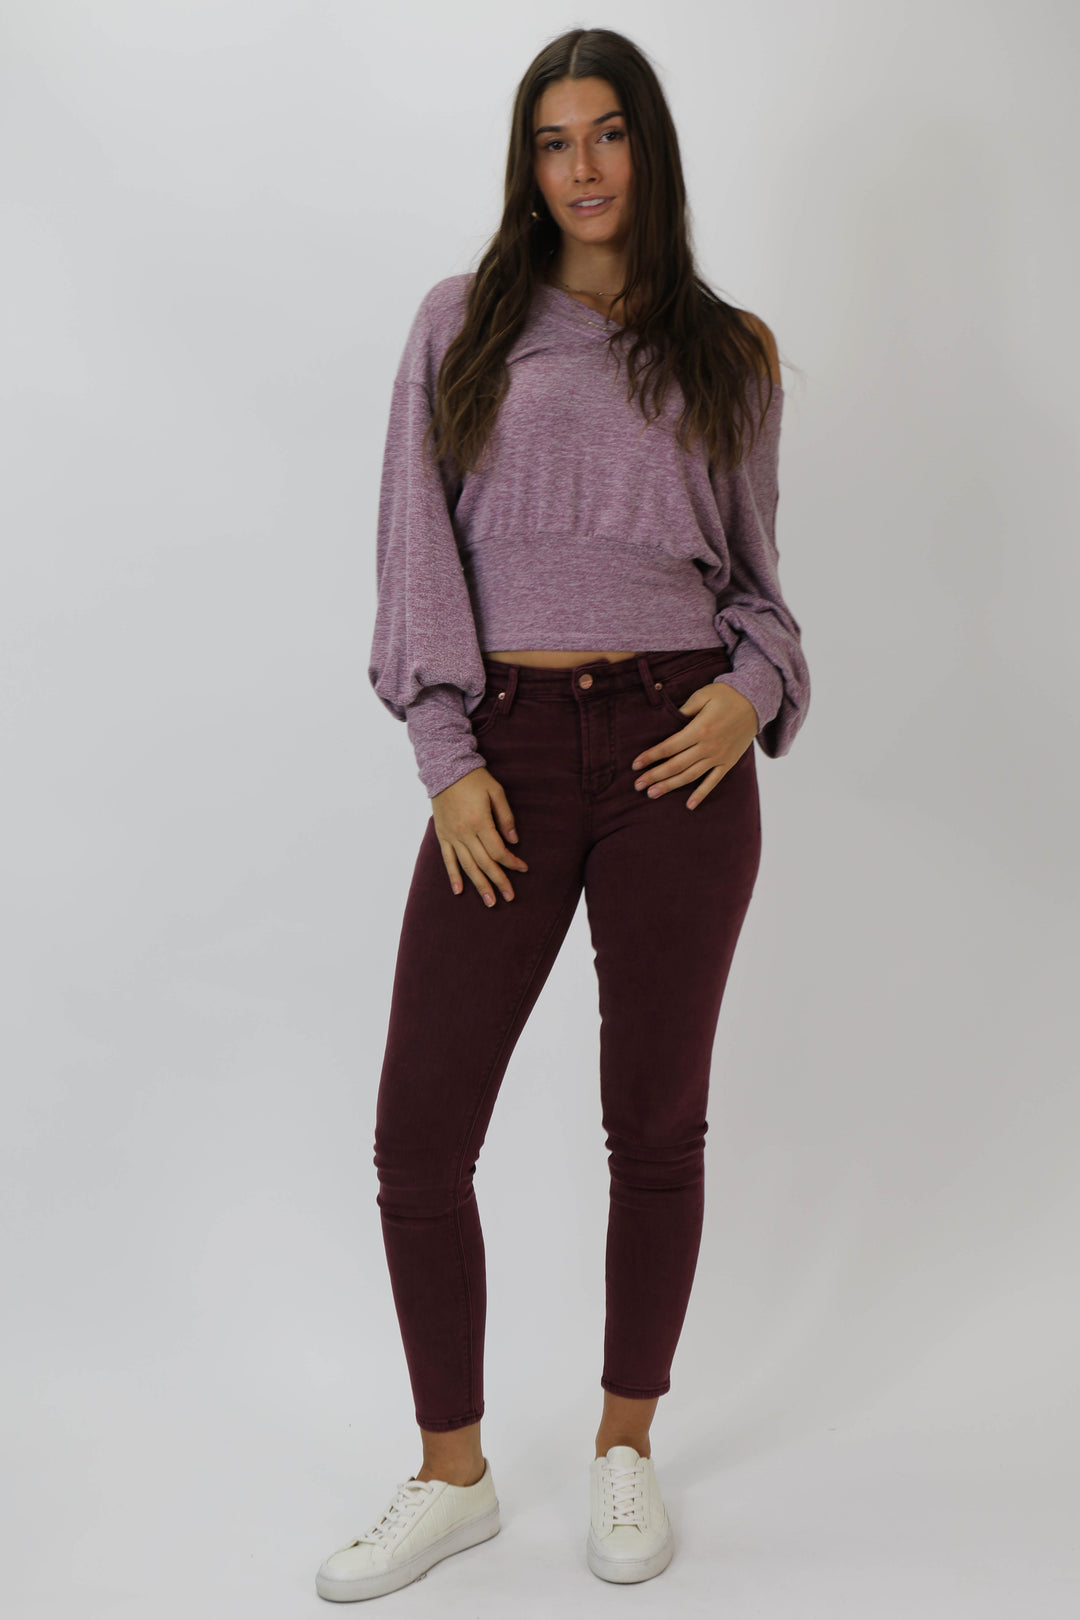 image of a female model wearing a GISELE HIGH RISE ANKLE SKINNY JEANS CABERNET JEANS